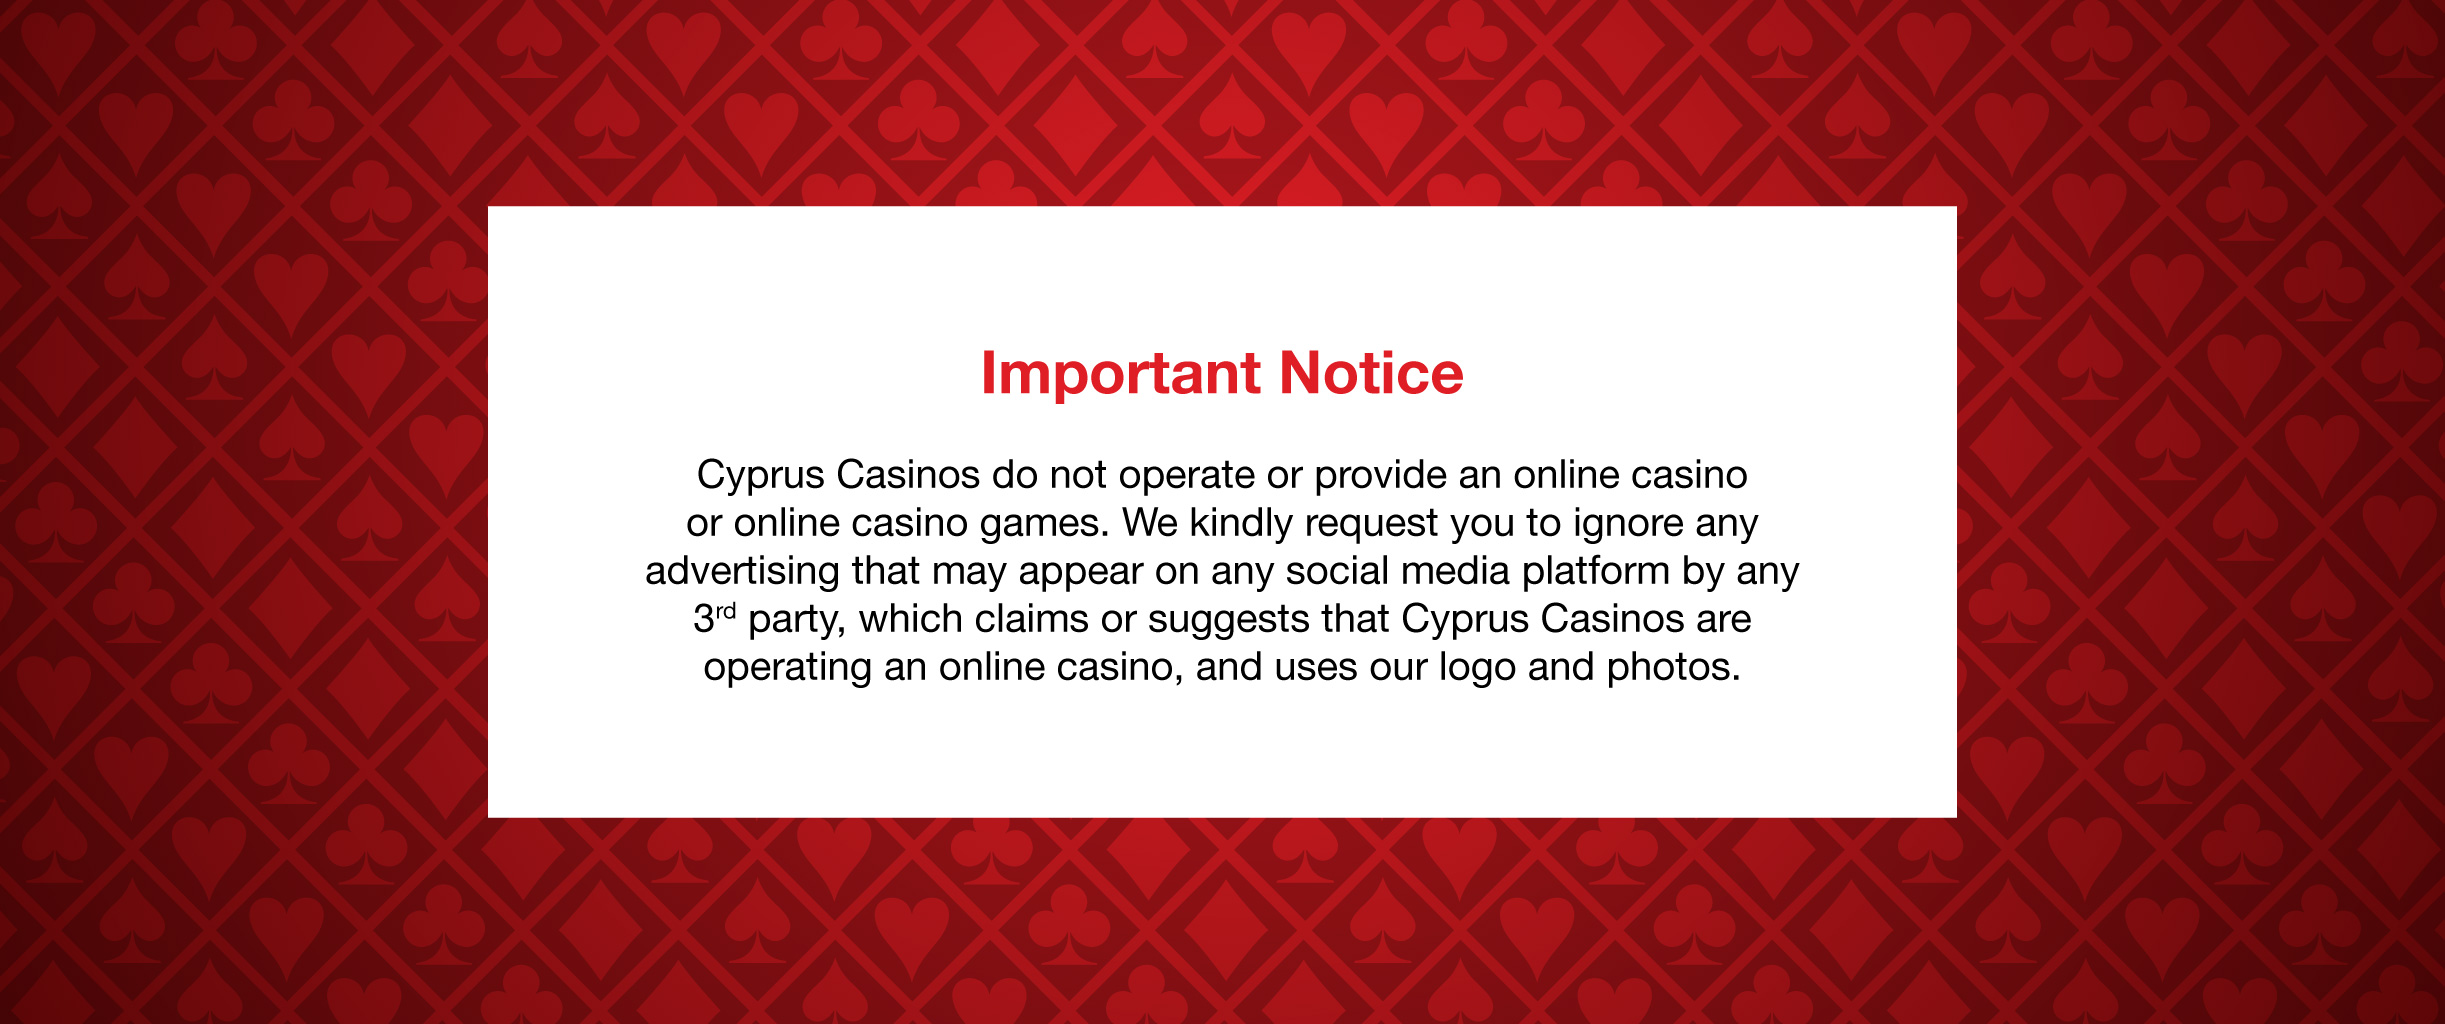 At Last, The Secret To best online casinos Is Revealed